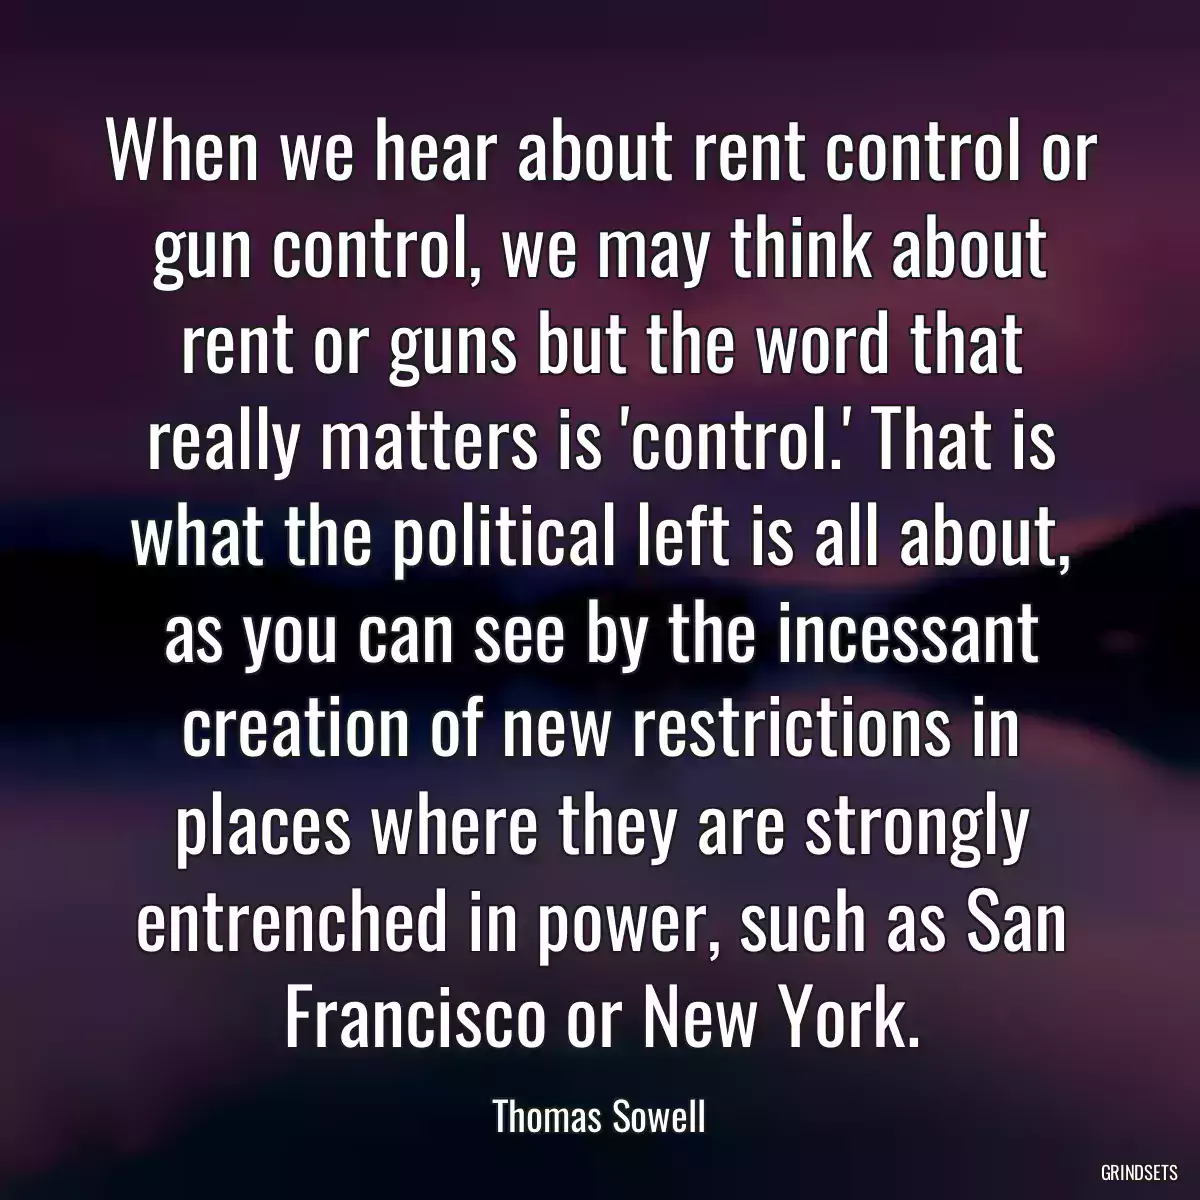 When we hear about rent control or gun control, we may think about rent or guns but the word that really matters is \'control.\' That is what the political left is all about, as you can see by the incessant creation of new restrictions in places where they are strongly entrenched in power, such as San Francisco or New York.